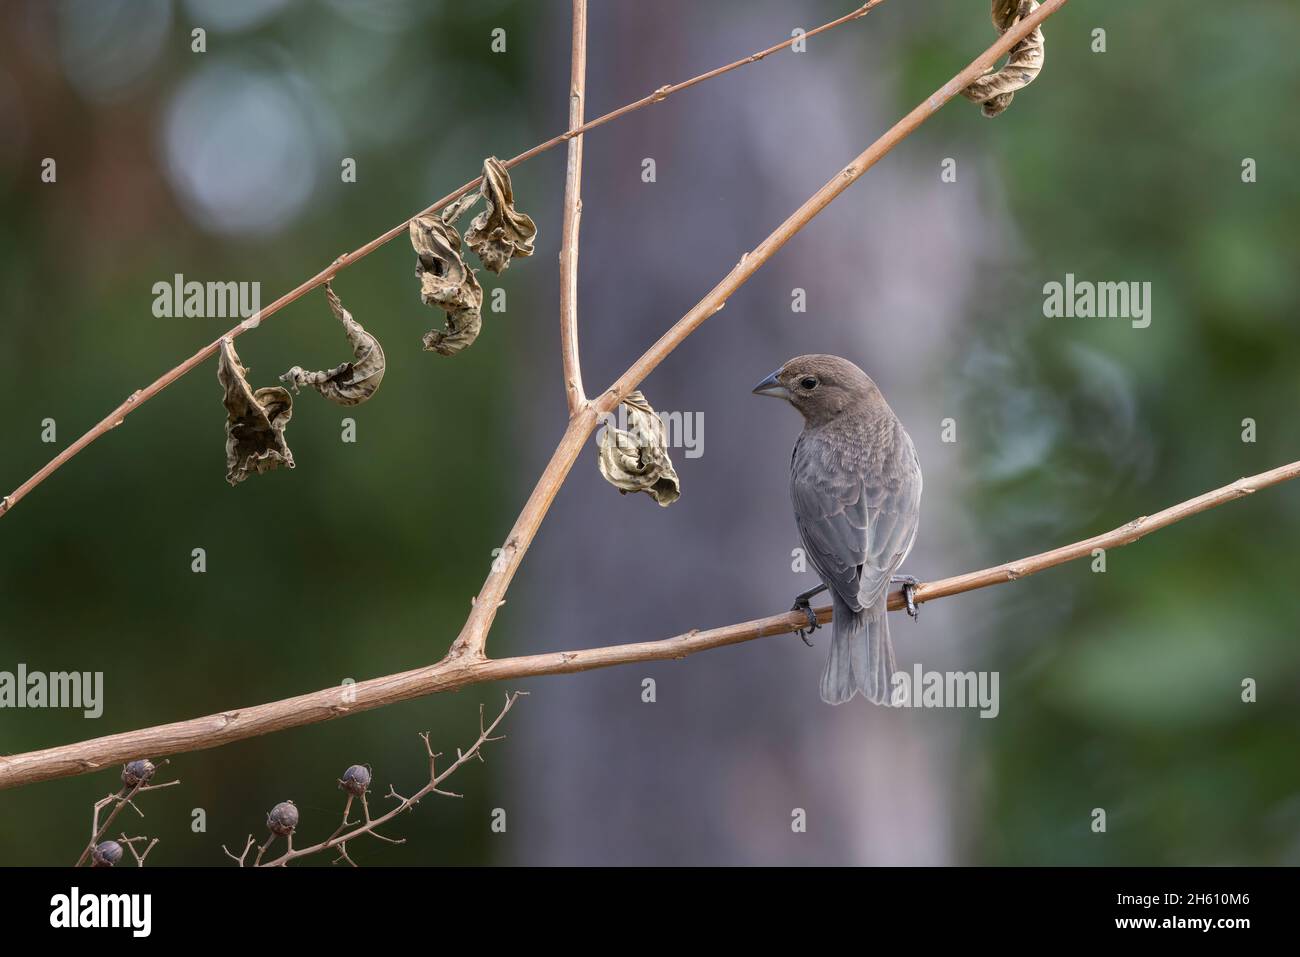 A brown-headed cowbird (Molothrus ater) perched on a branch in St. Augu Stock Photo